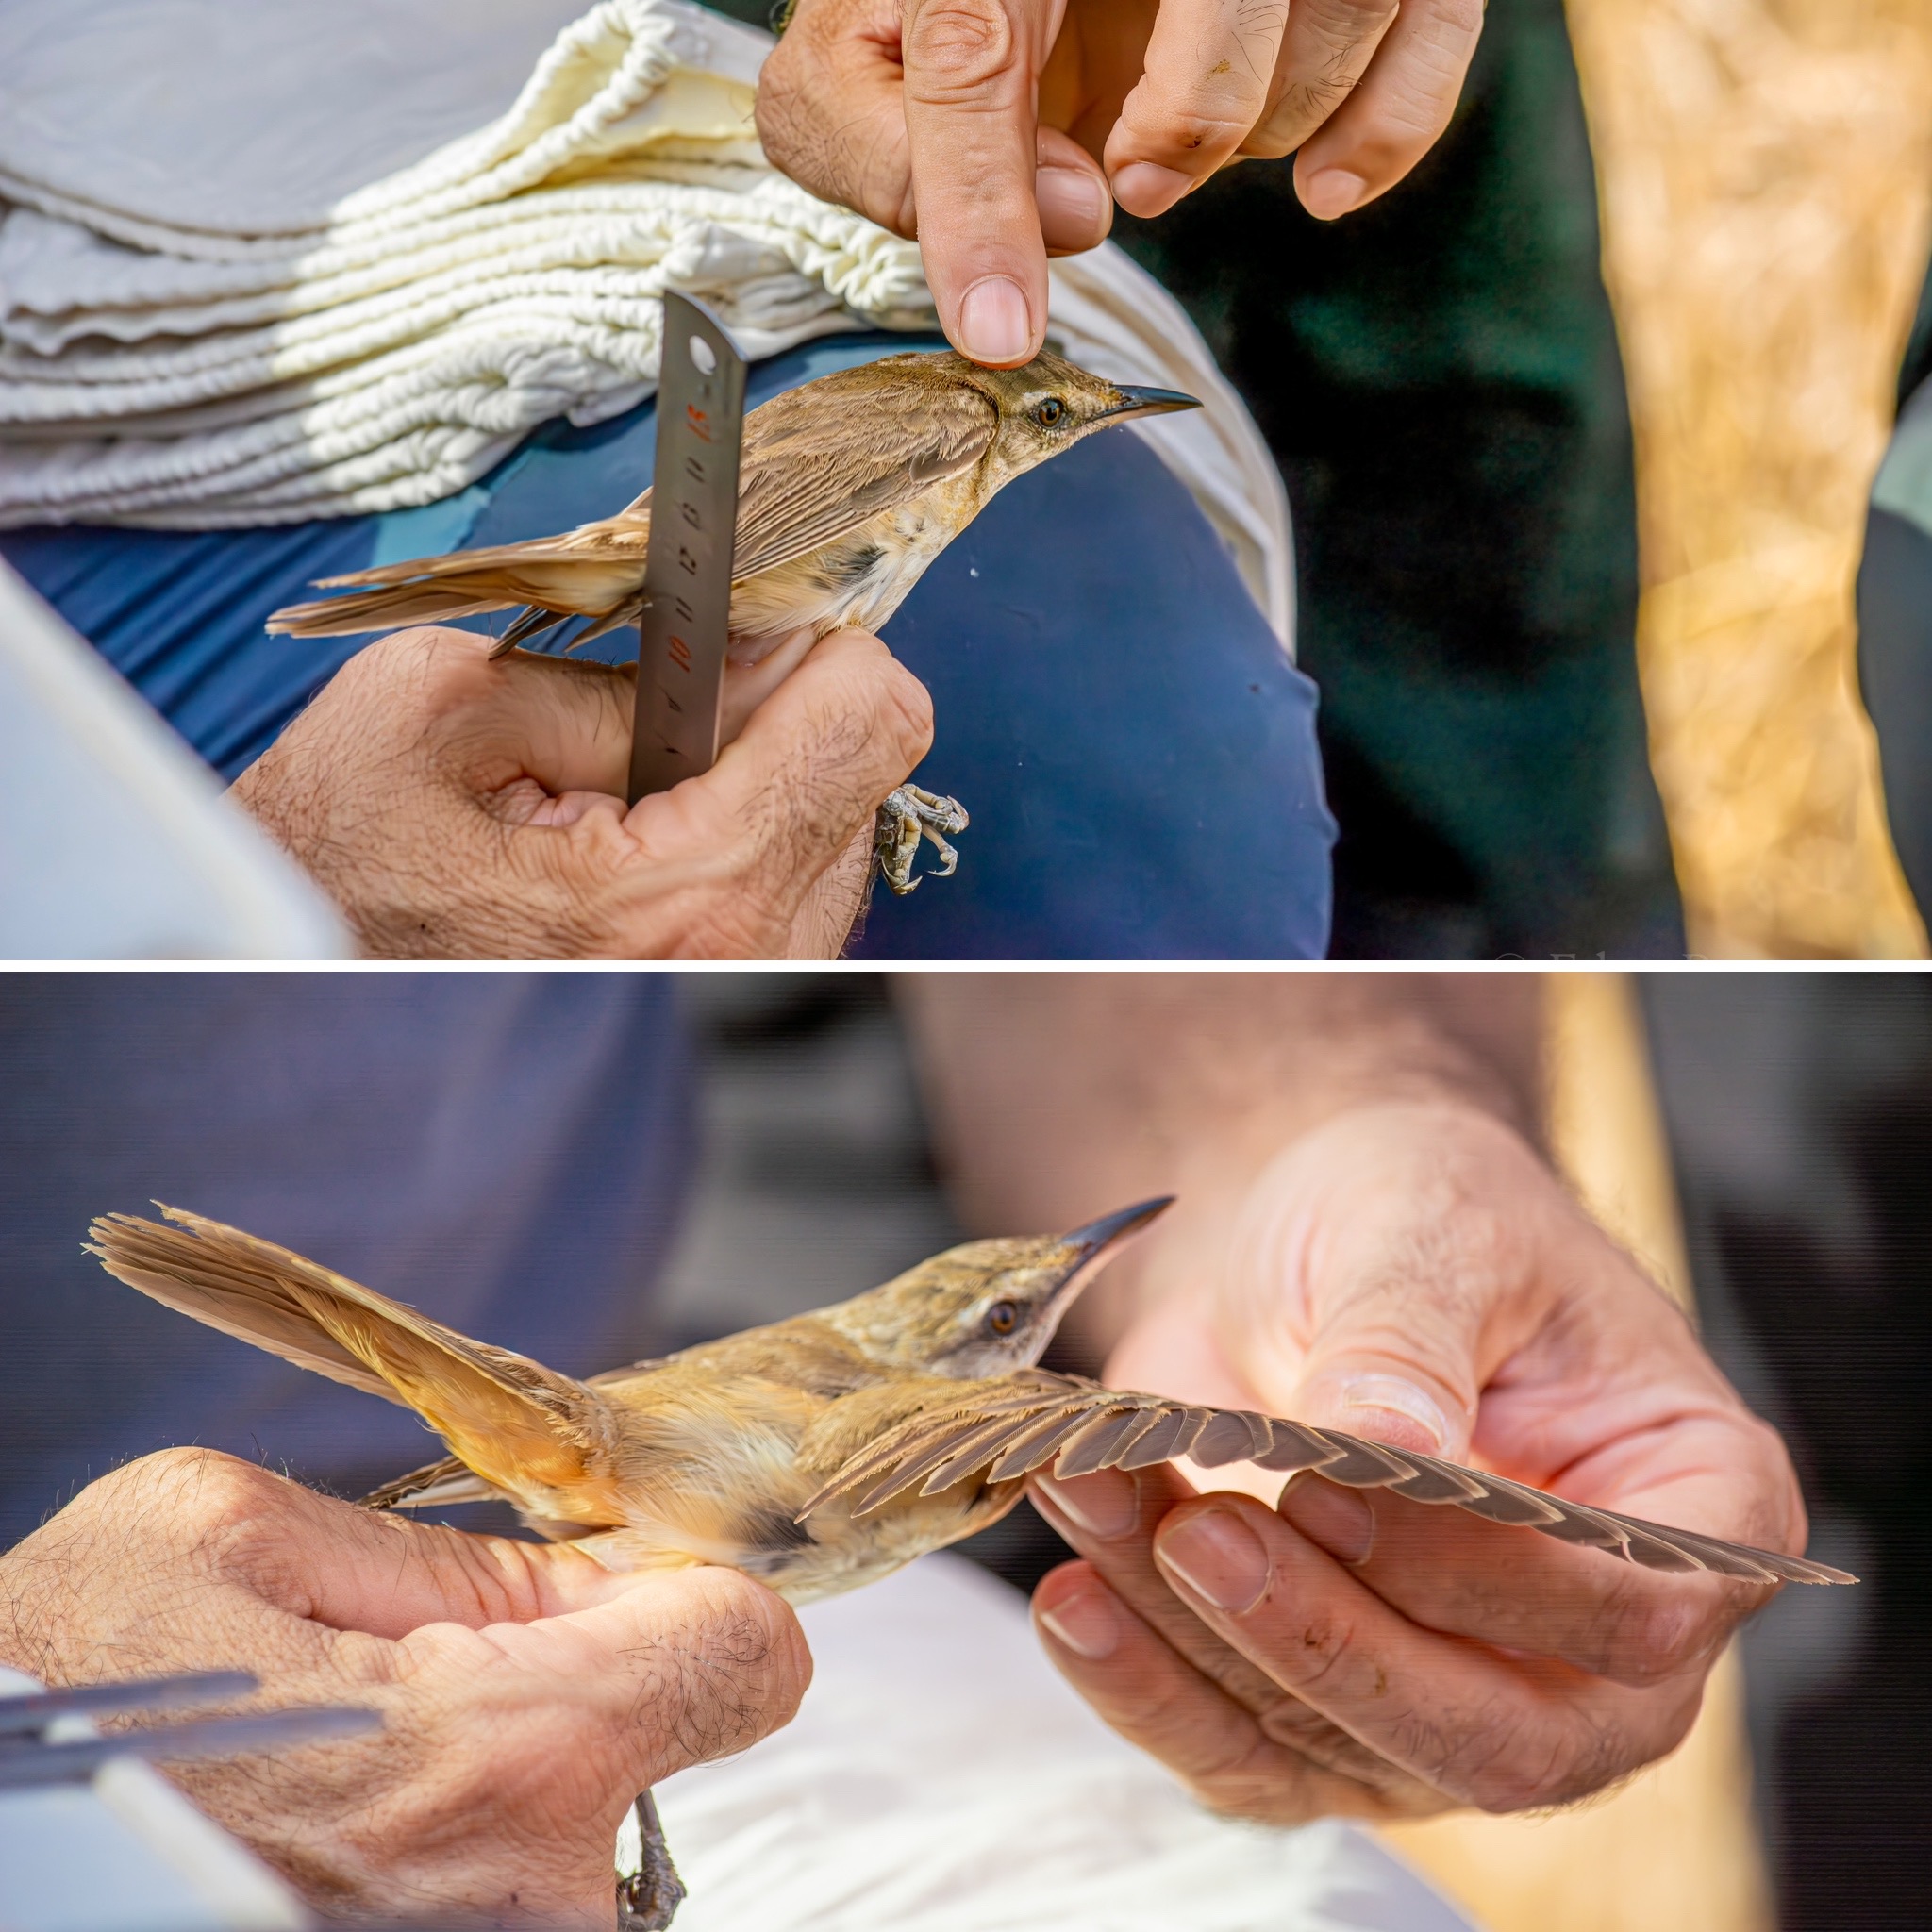 two images show a biologist holding a small brown bird in leg-hold grip. in one image he is holding a wing ruler and pointing at the birds head feathers. In the second he is spreading out one of the bird's wings to show its flight feathers